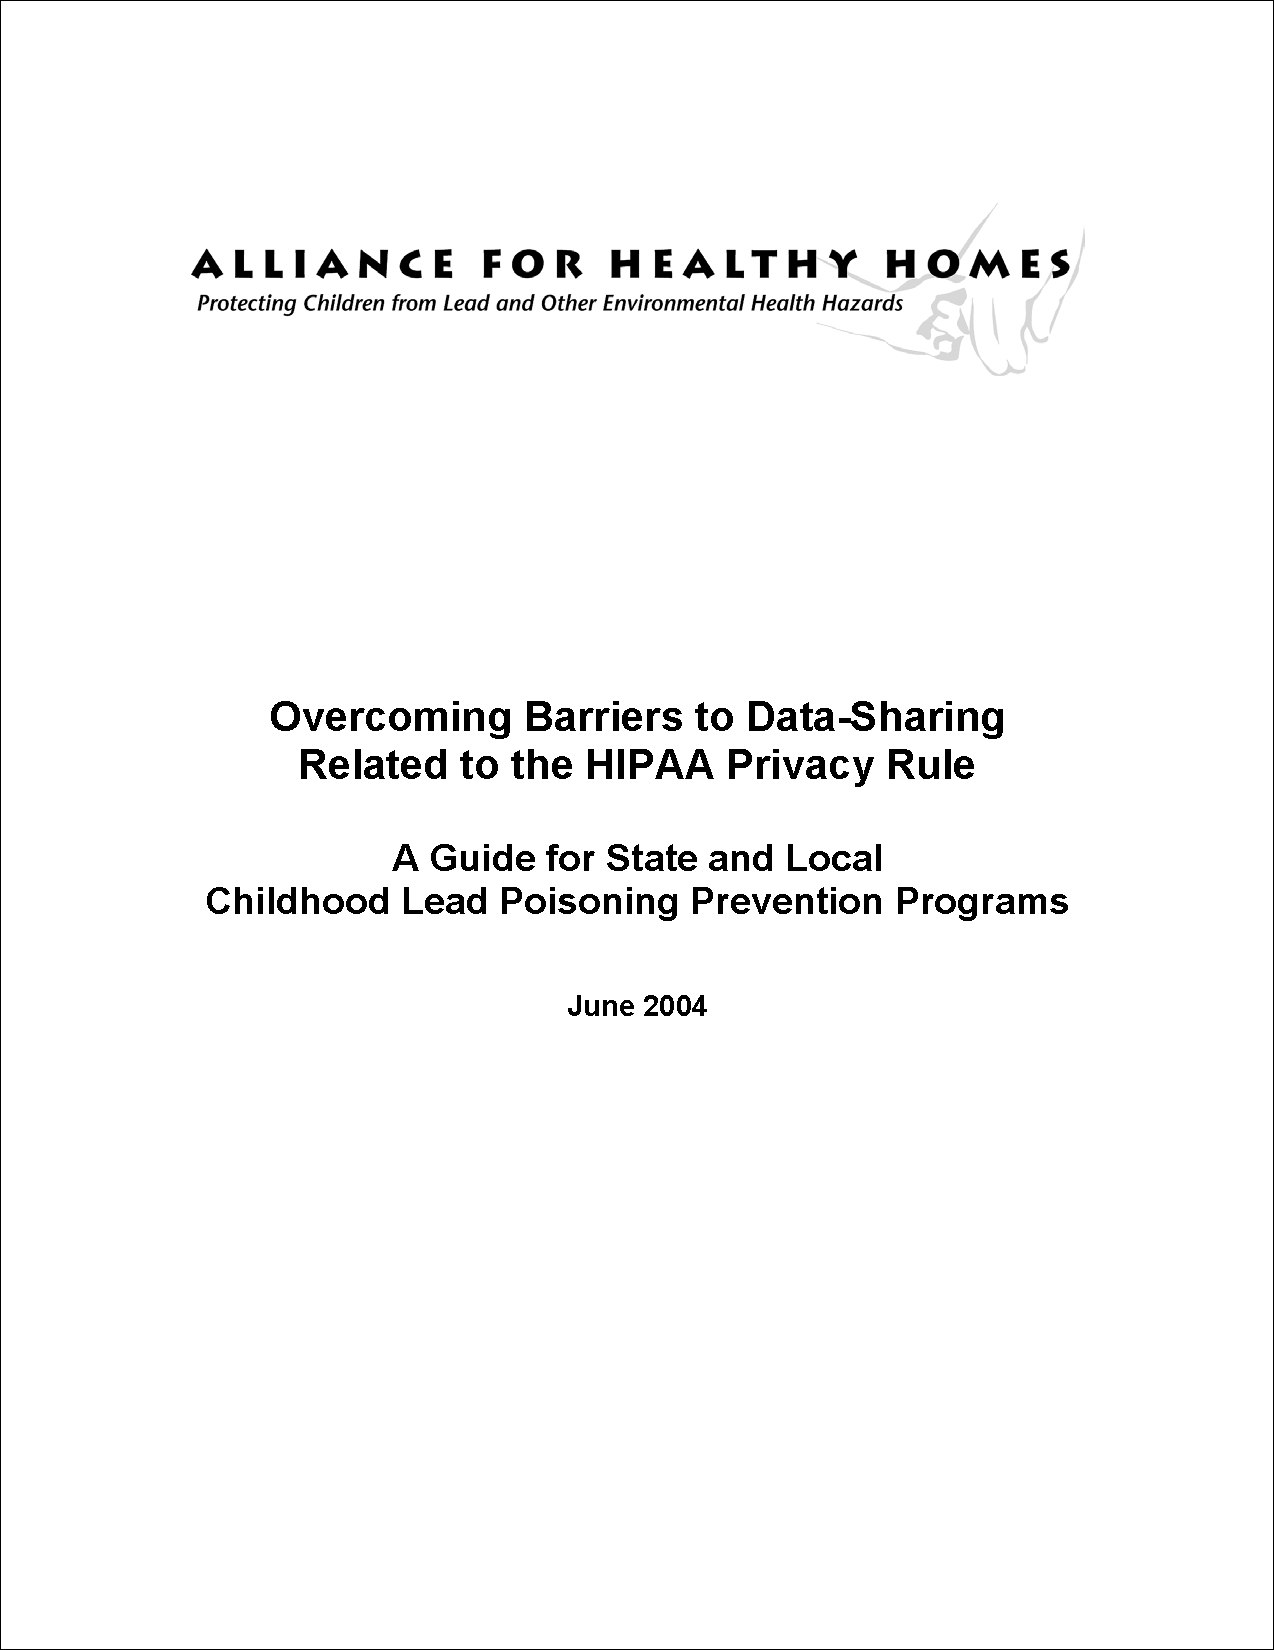 Overcoming Barriers to Data-Sharing Related to the HIPAA Privacy Rule: A Guide for State and Local Childhood Lead Poisoning Prevention Programs